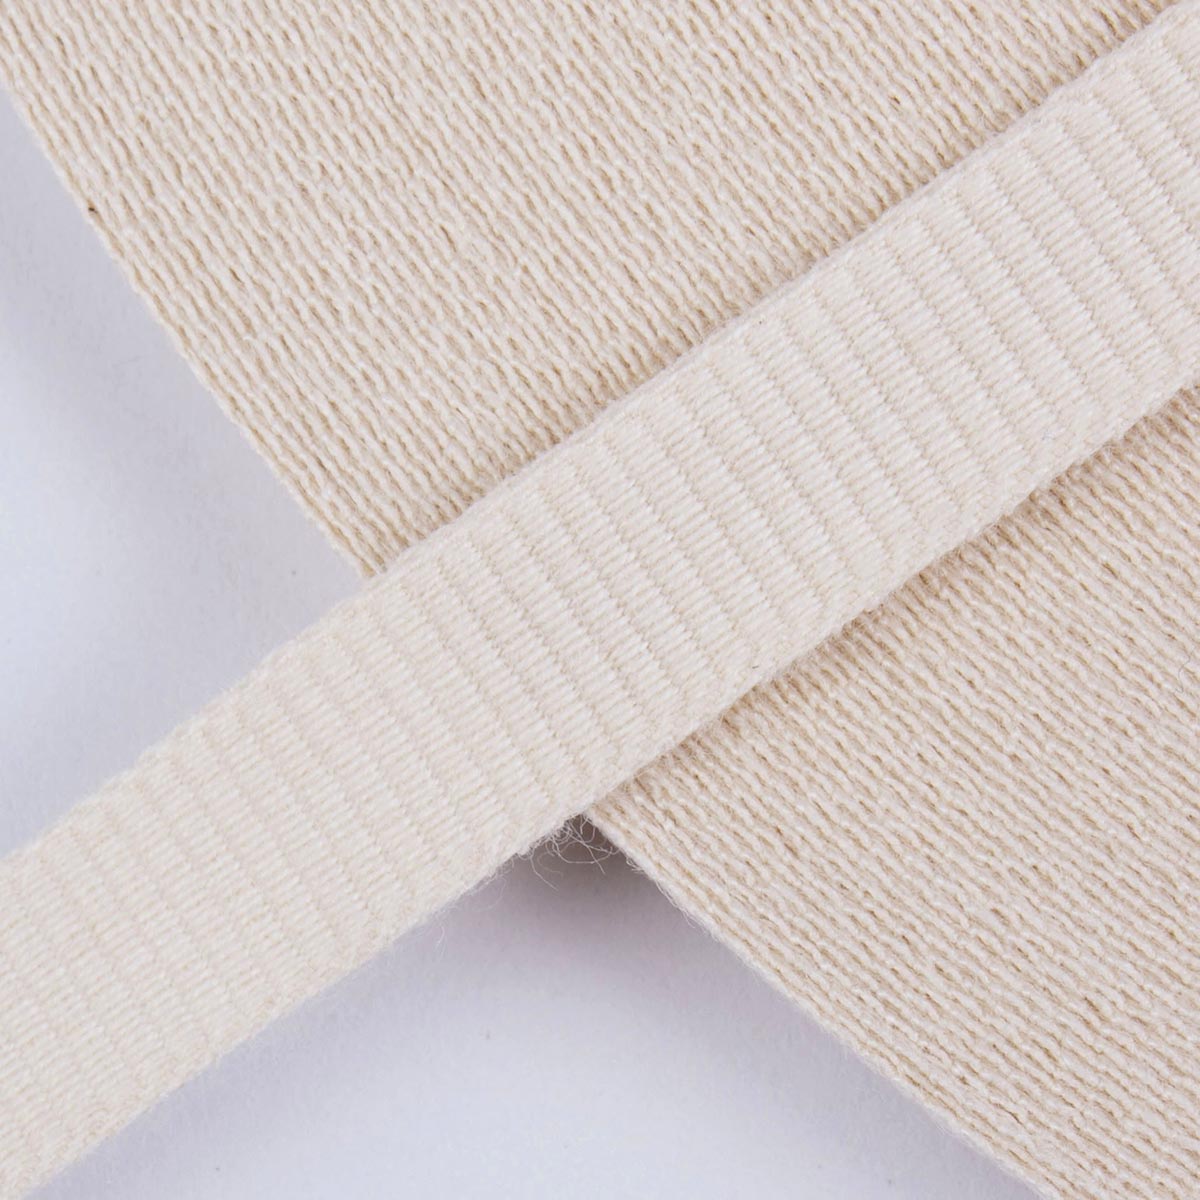 Tight weave cotton ribbon - 1/4 width / Natural